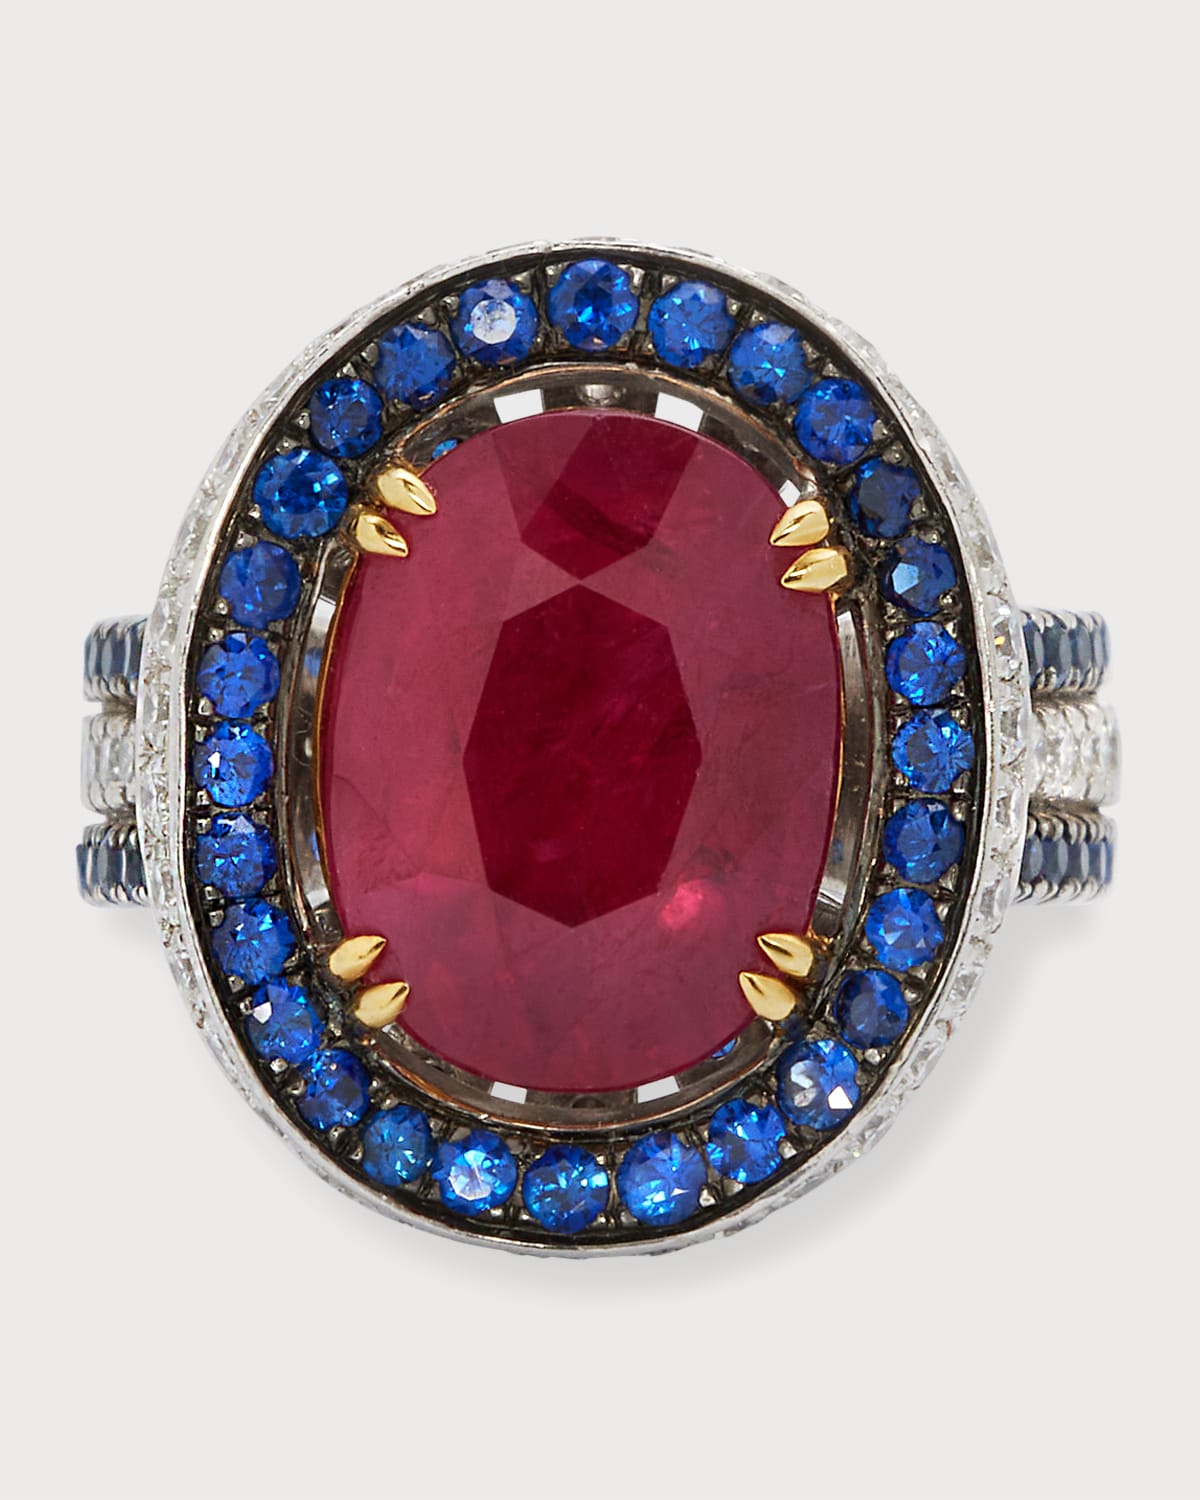 18K Ruby Ring with Blue Sapphire and Diamond, Size 6.5